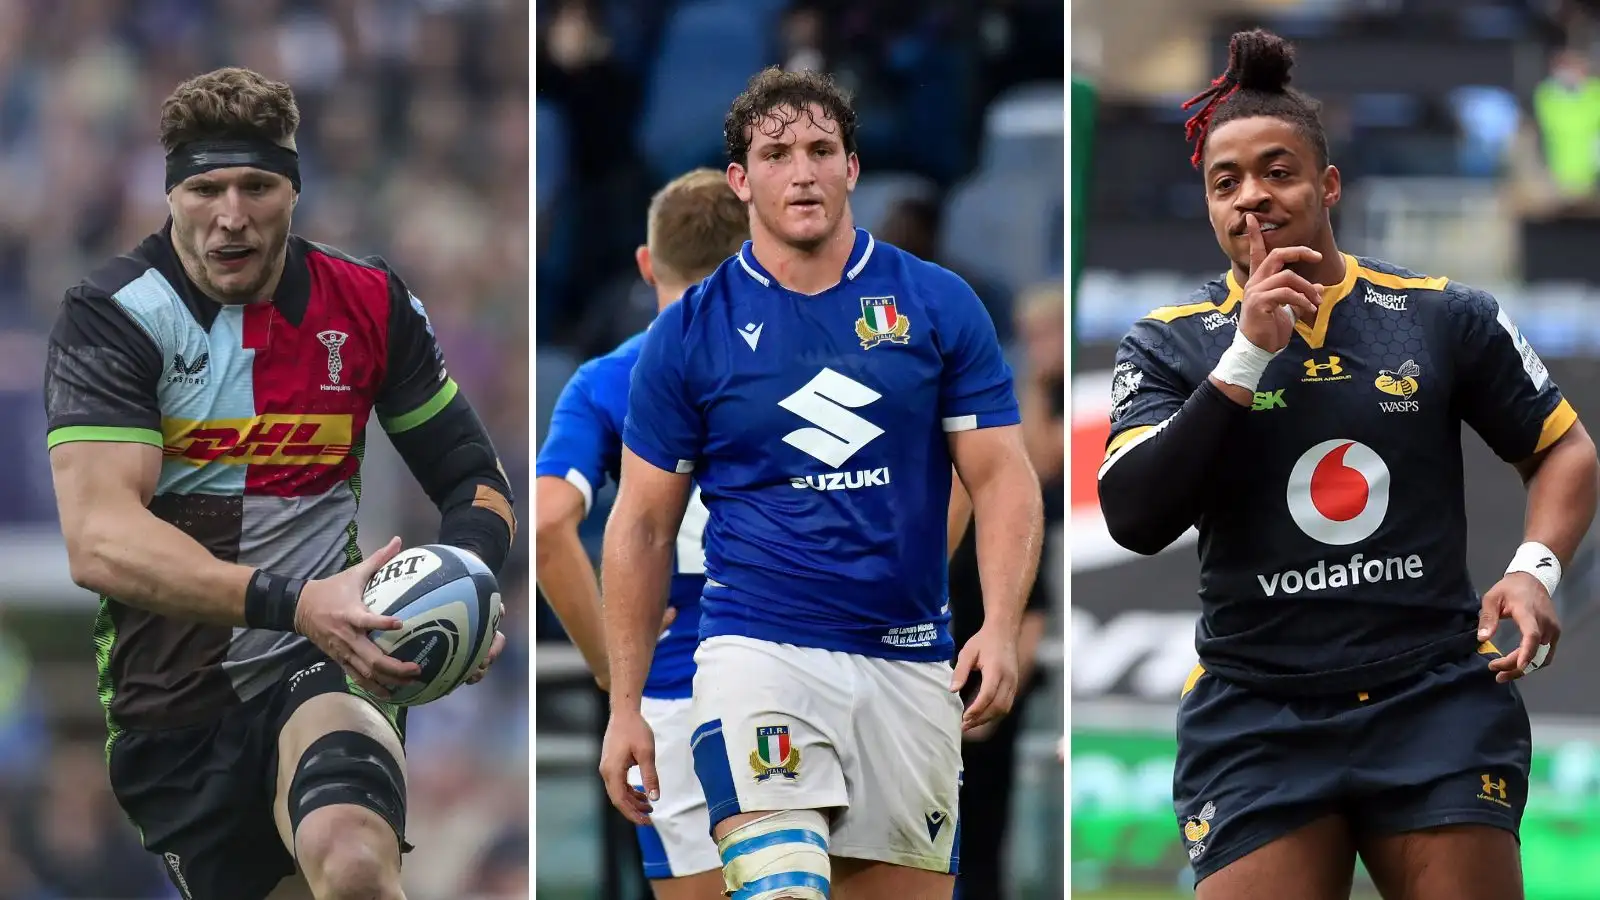 Paolo Odogwu and Dino Lamb are among the five uncapped players in the 46-man Italy training squad for the Rugby World Cup.